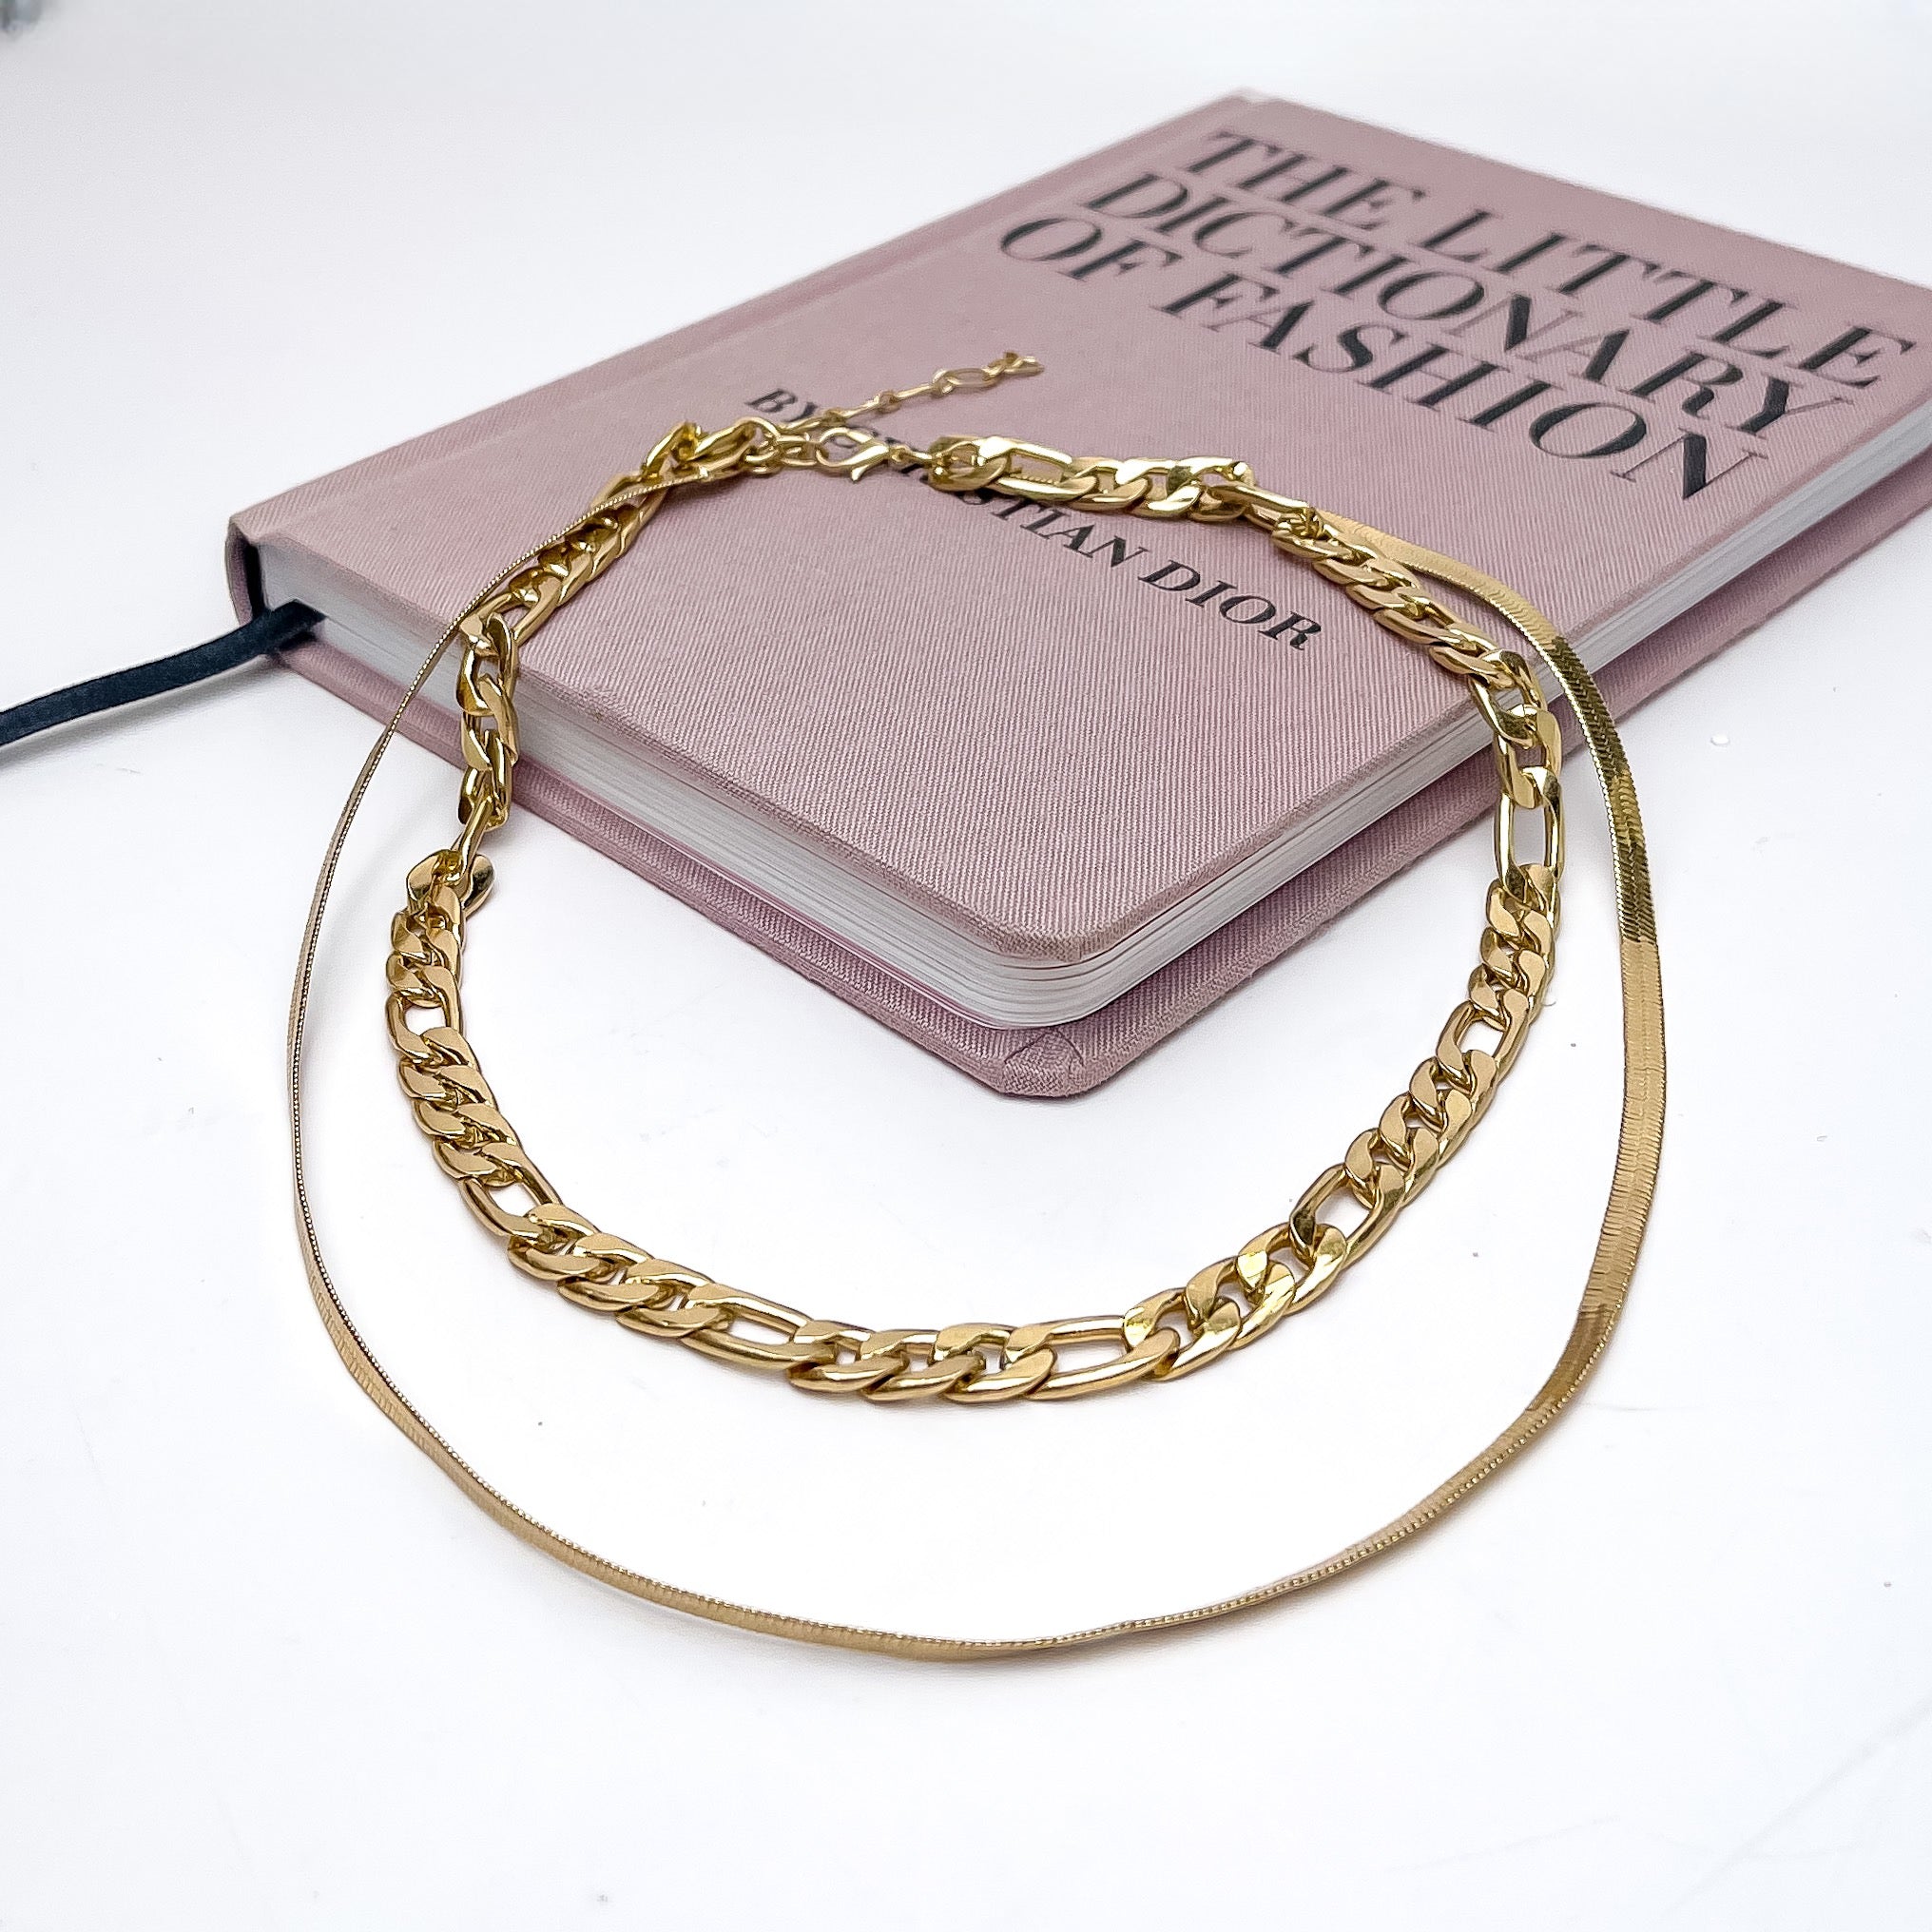 Dinner Date Double Strand Gold Tone Necklace. This necklace is pictured on a pink book with a white background.